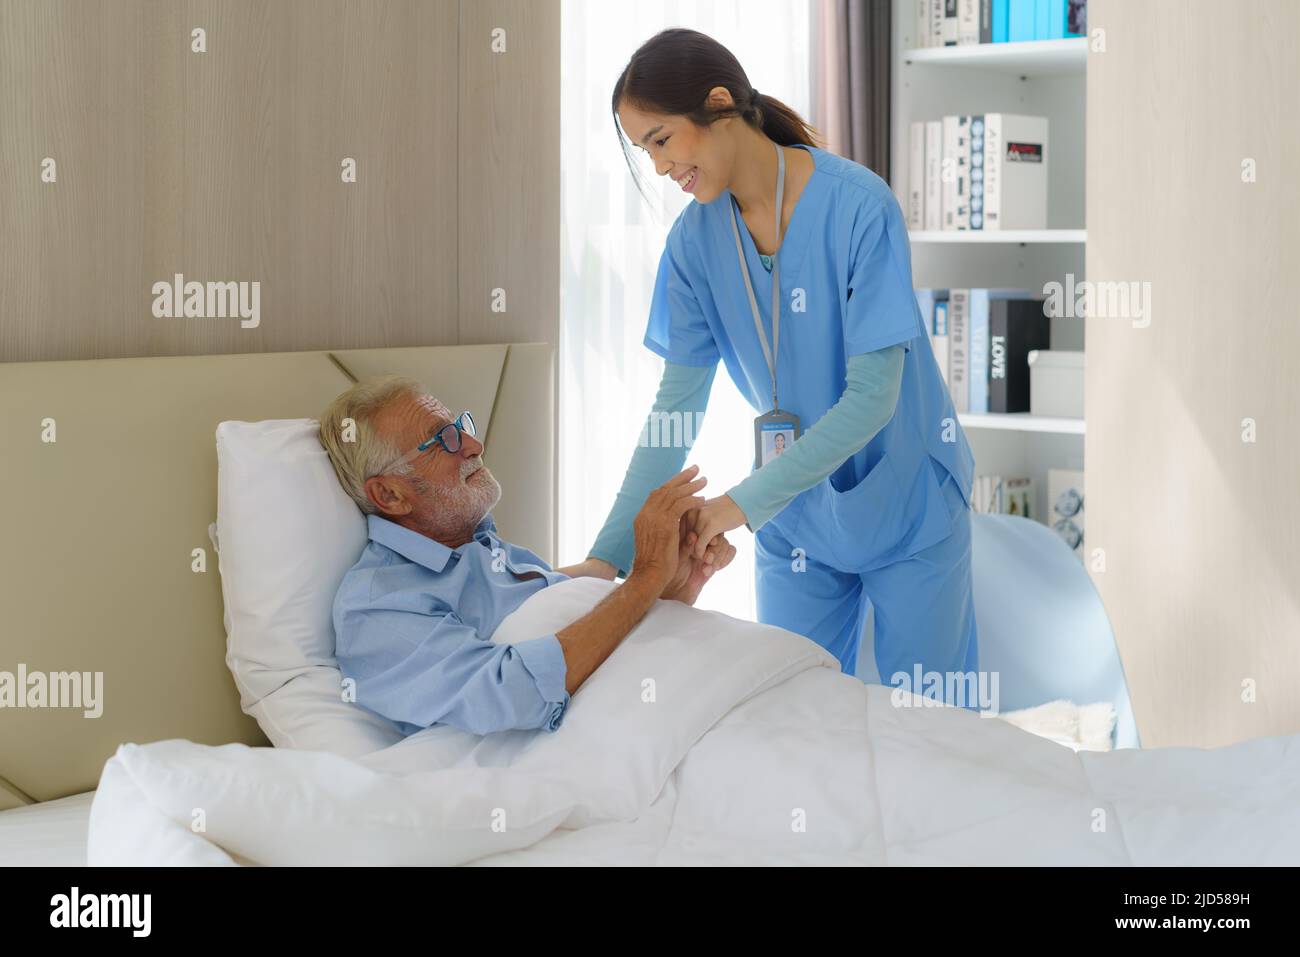 Asian nurse standing on a home bed next to an older man helping hands, care. Elderly patient care and health lifestyle, medical concept. Stock Photo